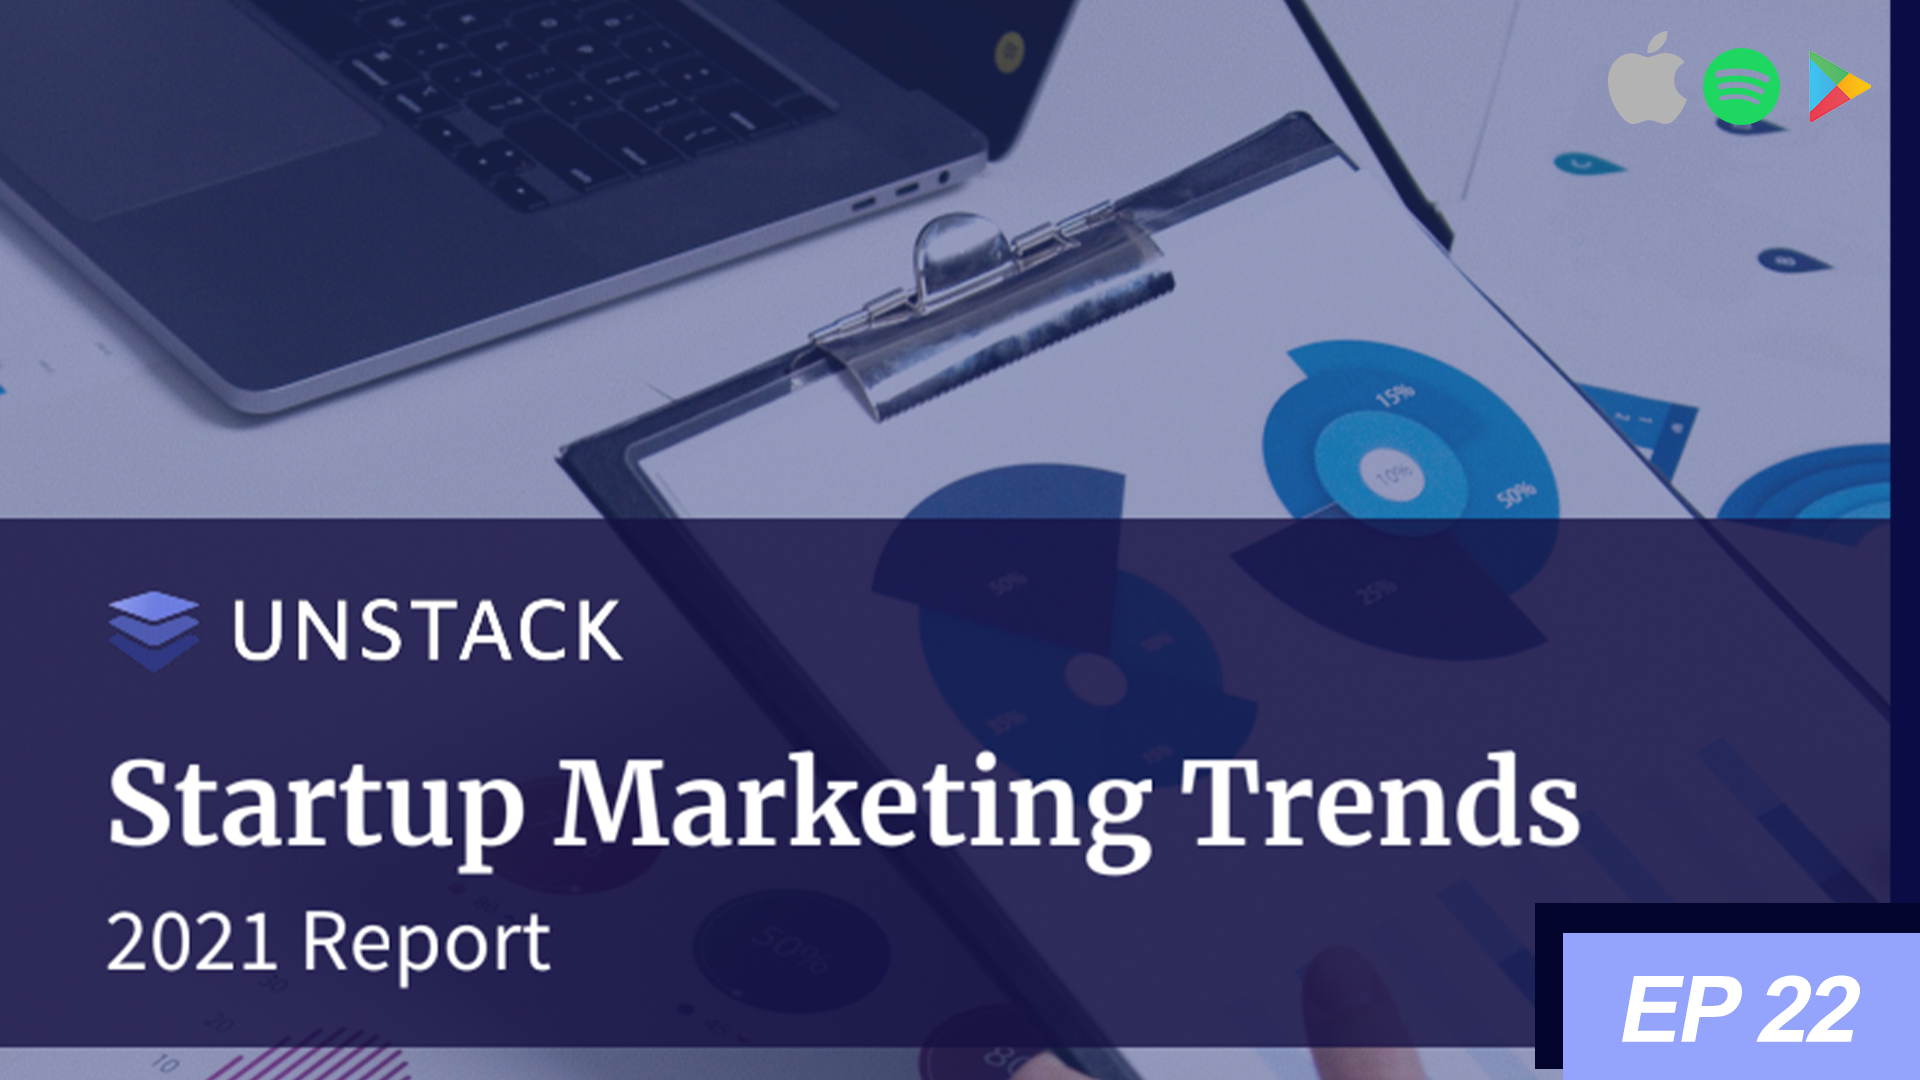 Inside Our 2021 Report on Startup Marketing Trends